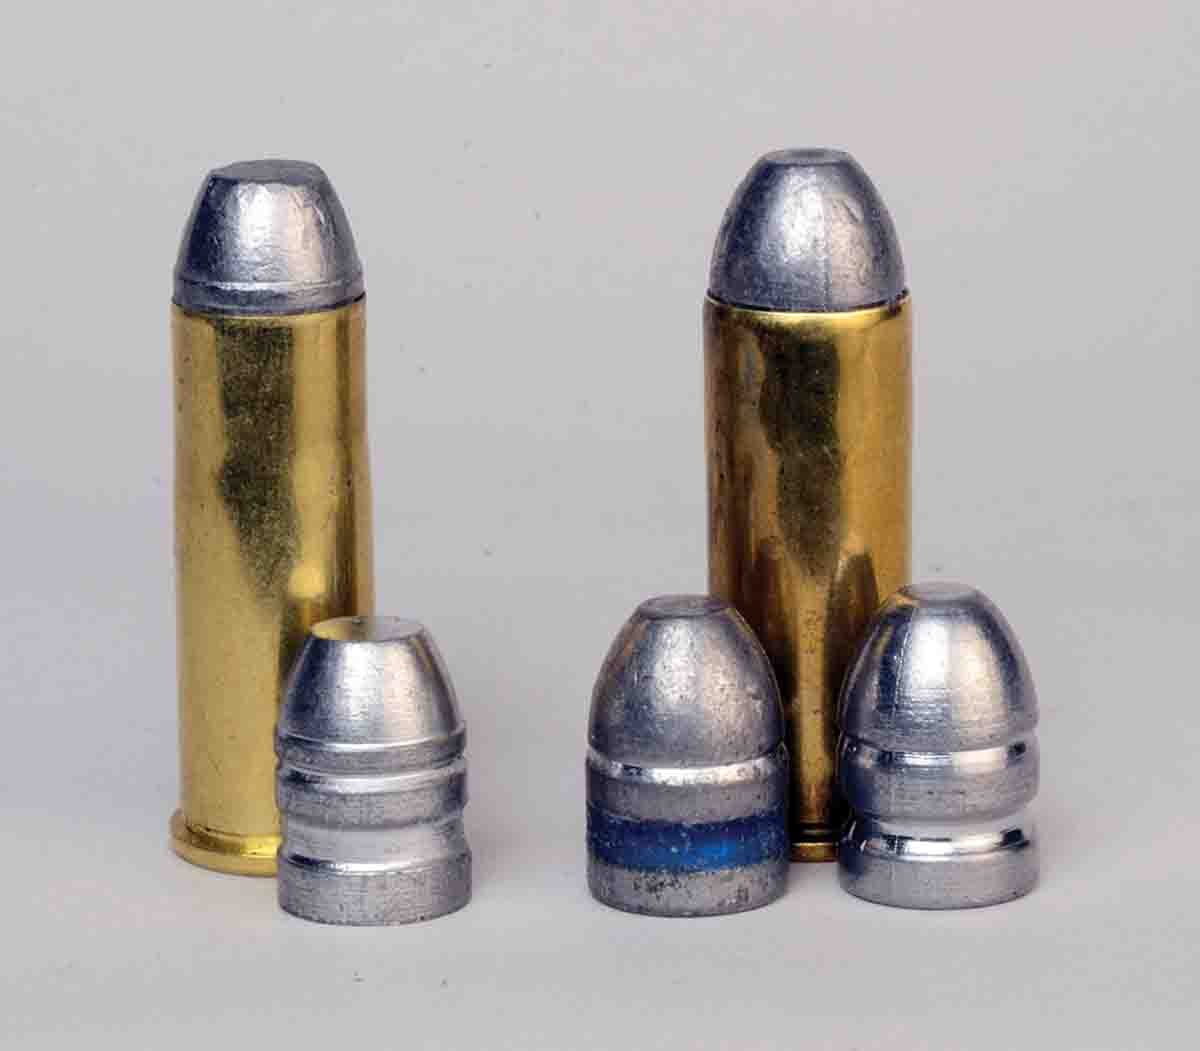 These are Mike’s handloads for his barrel length comparison. At left is a .44-40 with 214-grain bullets from RCBS mould 44-200RN. At right is a .45 Colt with a 233-grain commercially cast bullet and a 252-grain bullet from NEI mould 324.